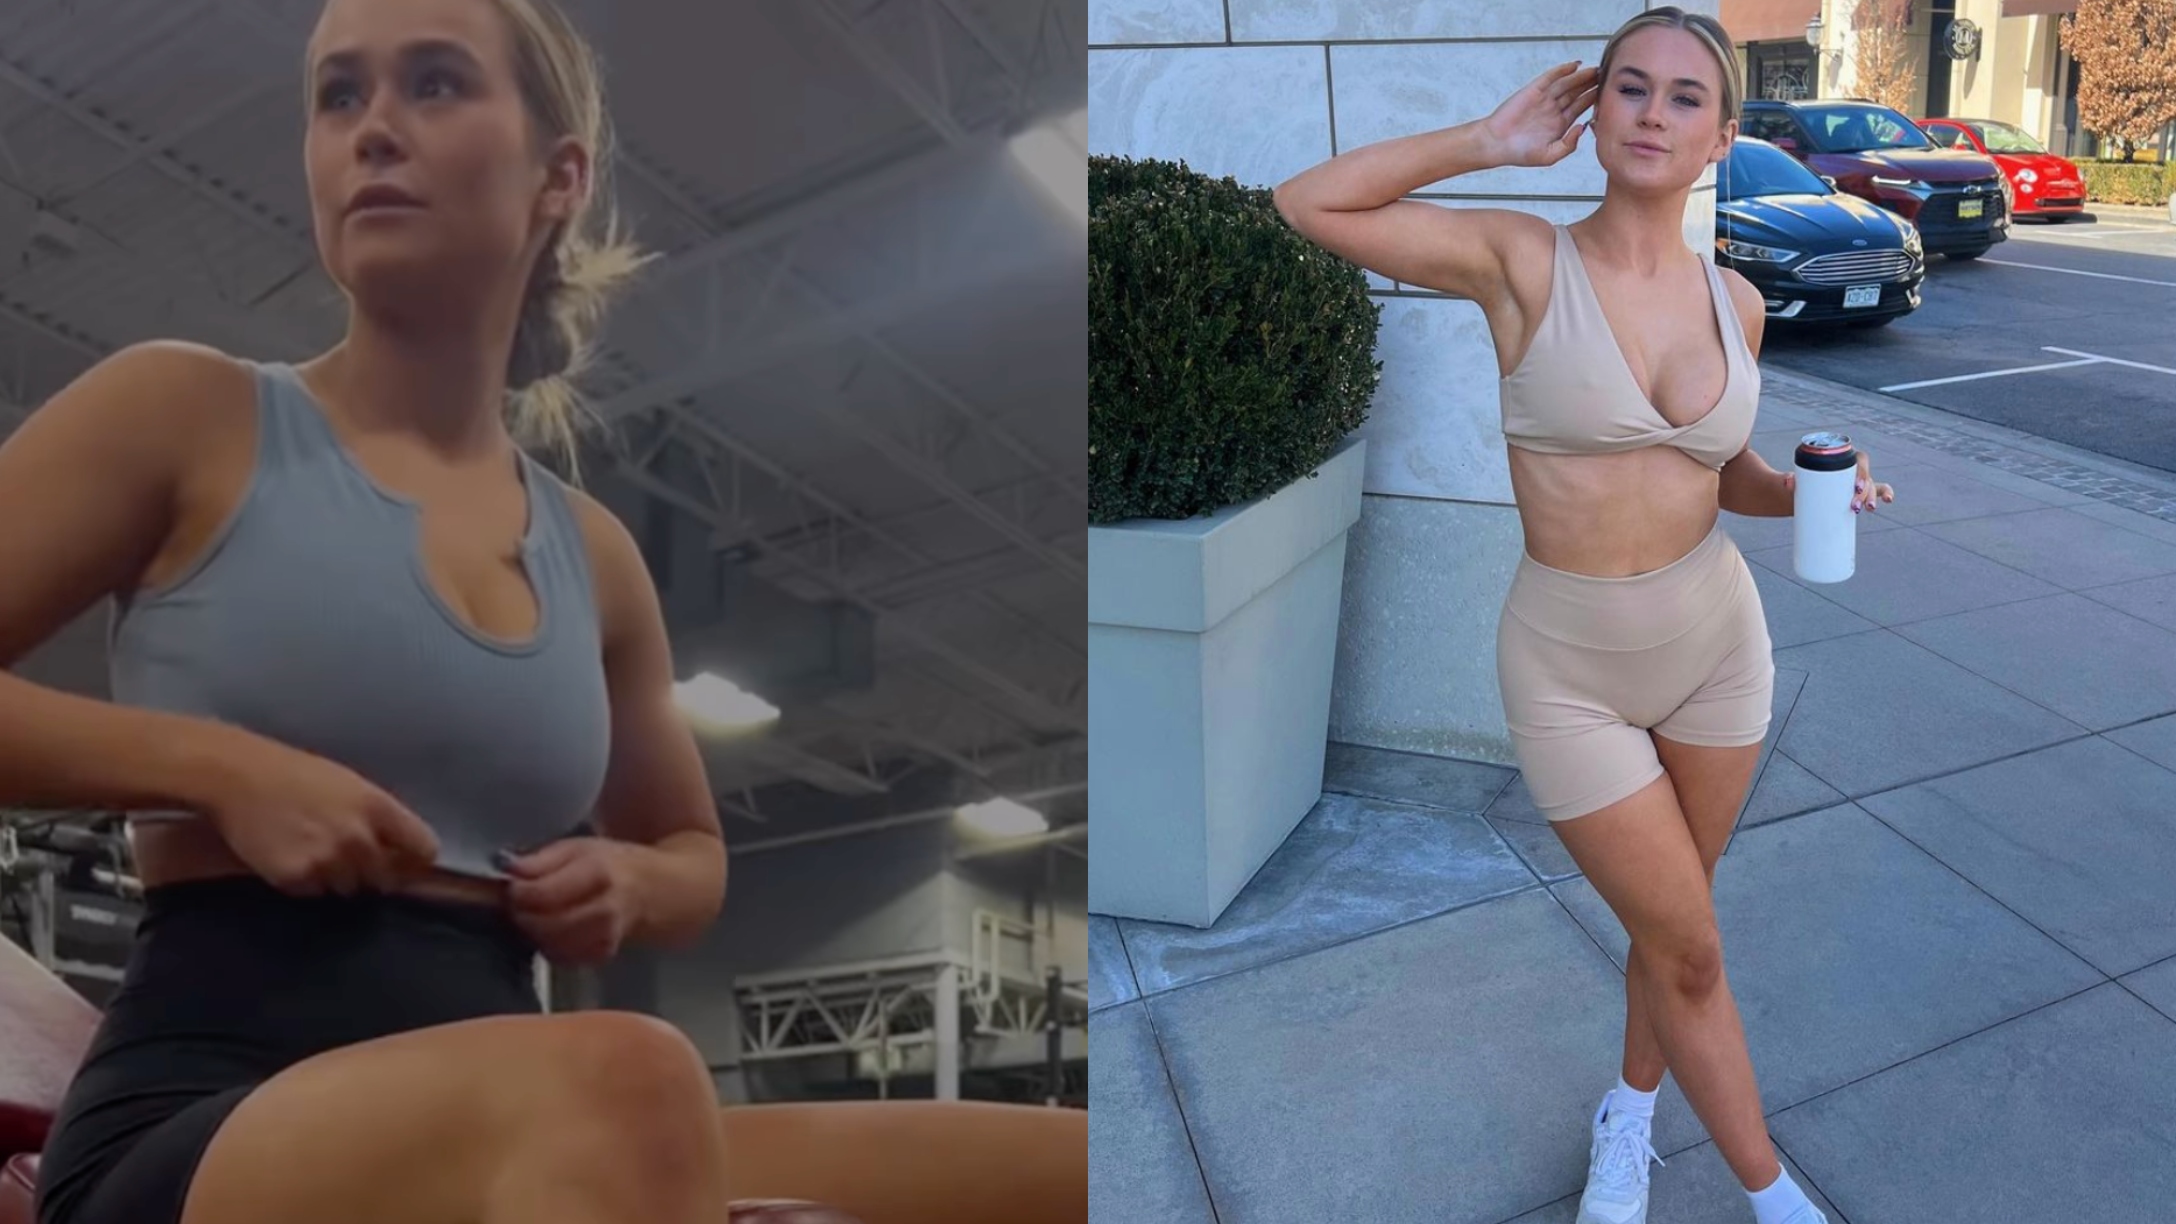 Your Boobs are Hanging Out:' Gym Karen Shames New Mom Over Workout Attire